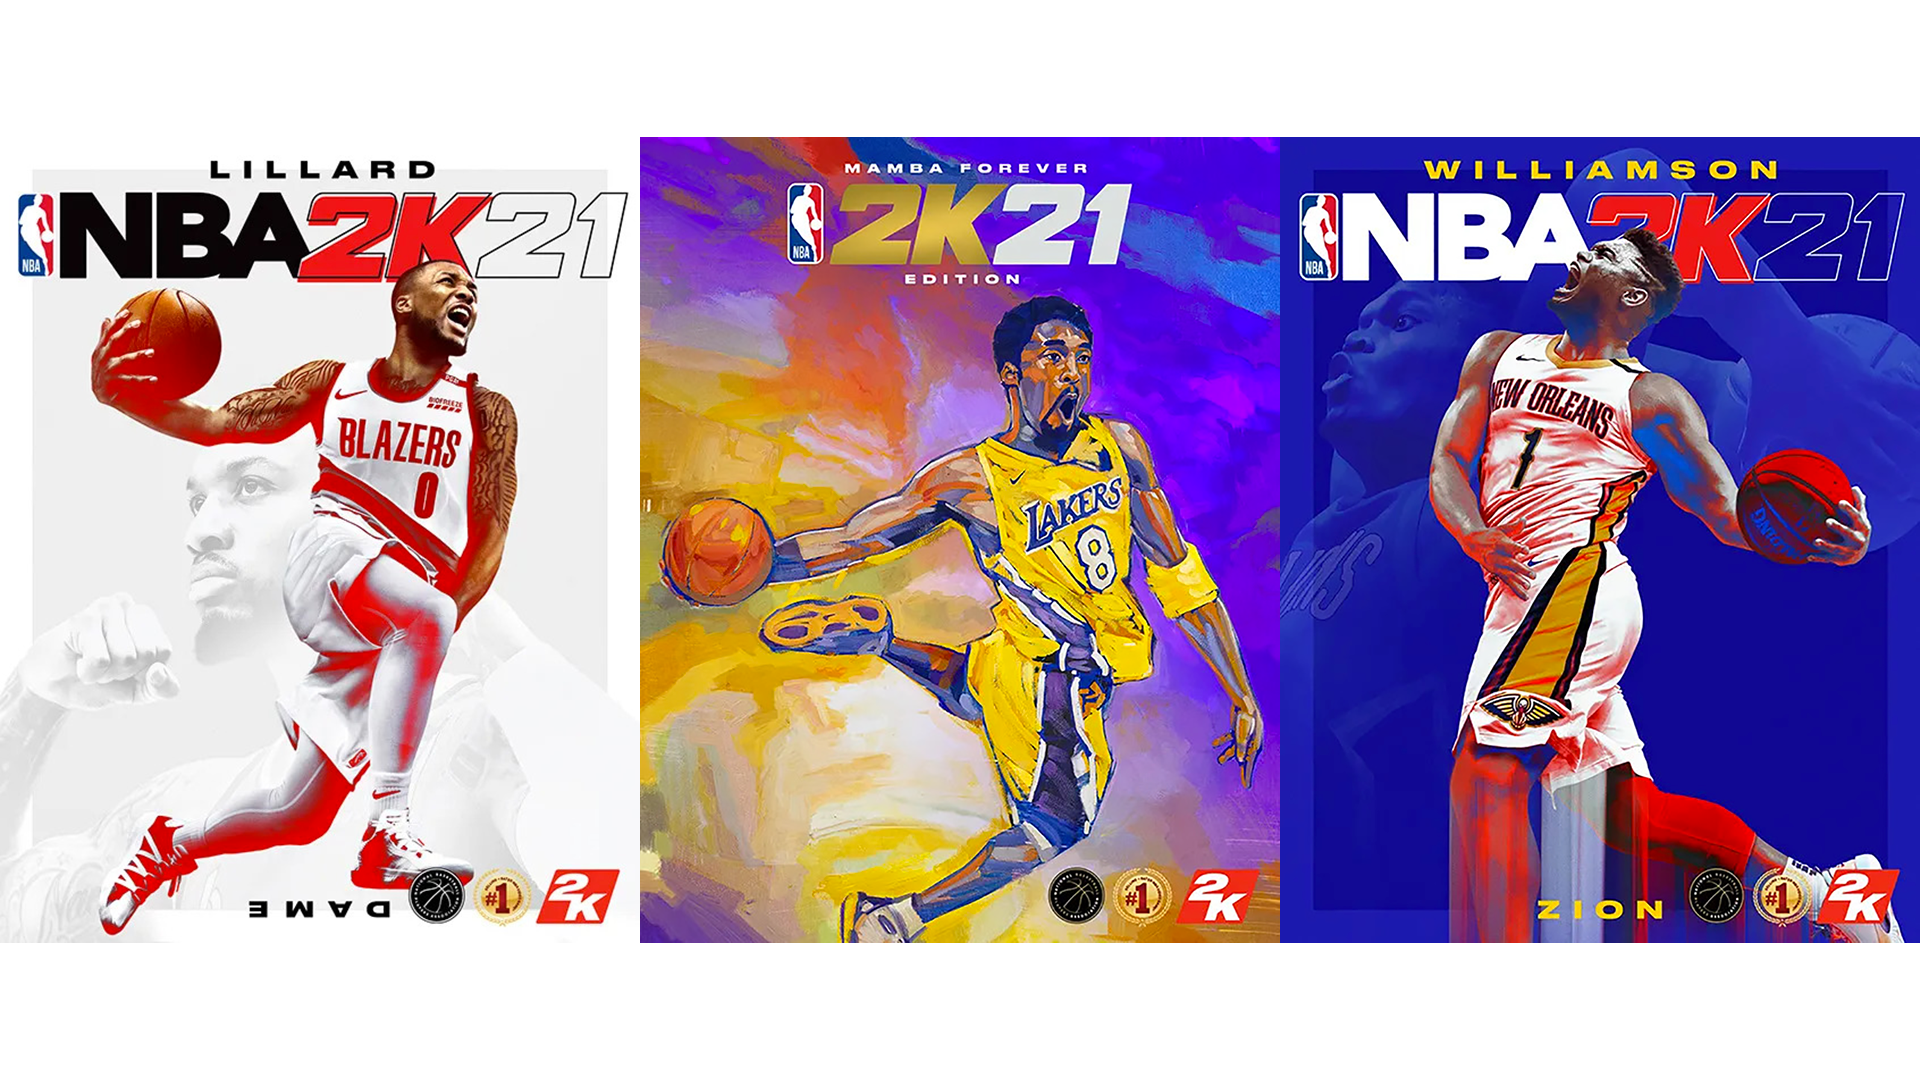 Nba k release date cost new features editions a guide to everything you need to know in sporting news